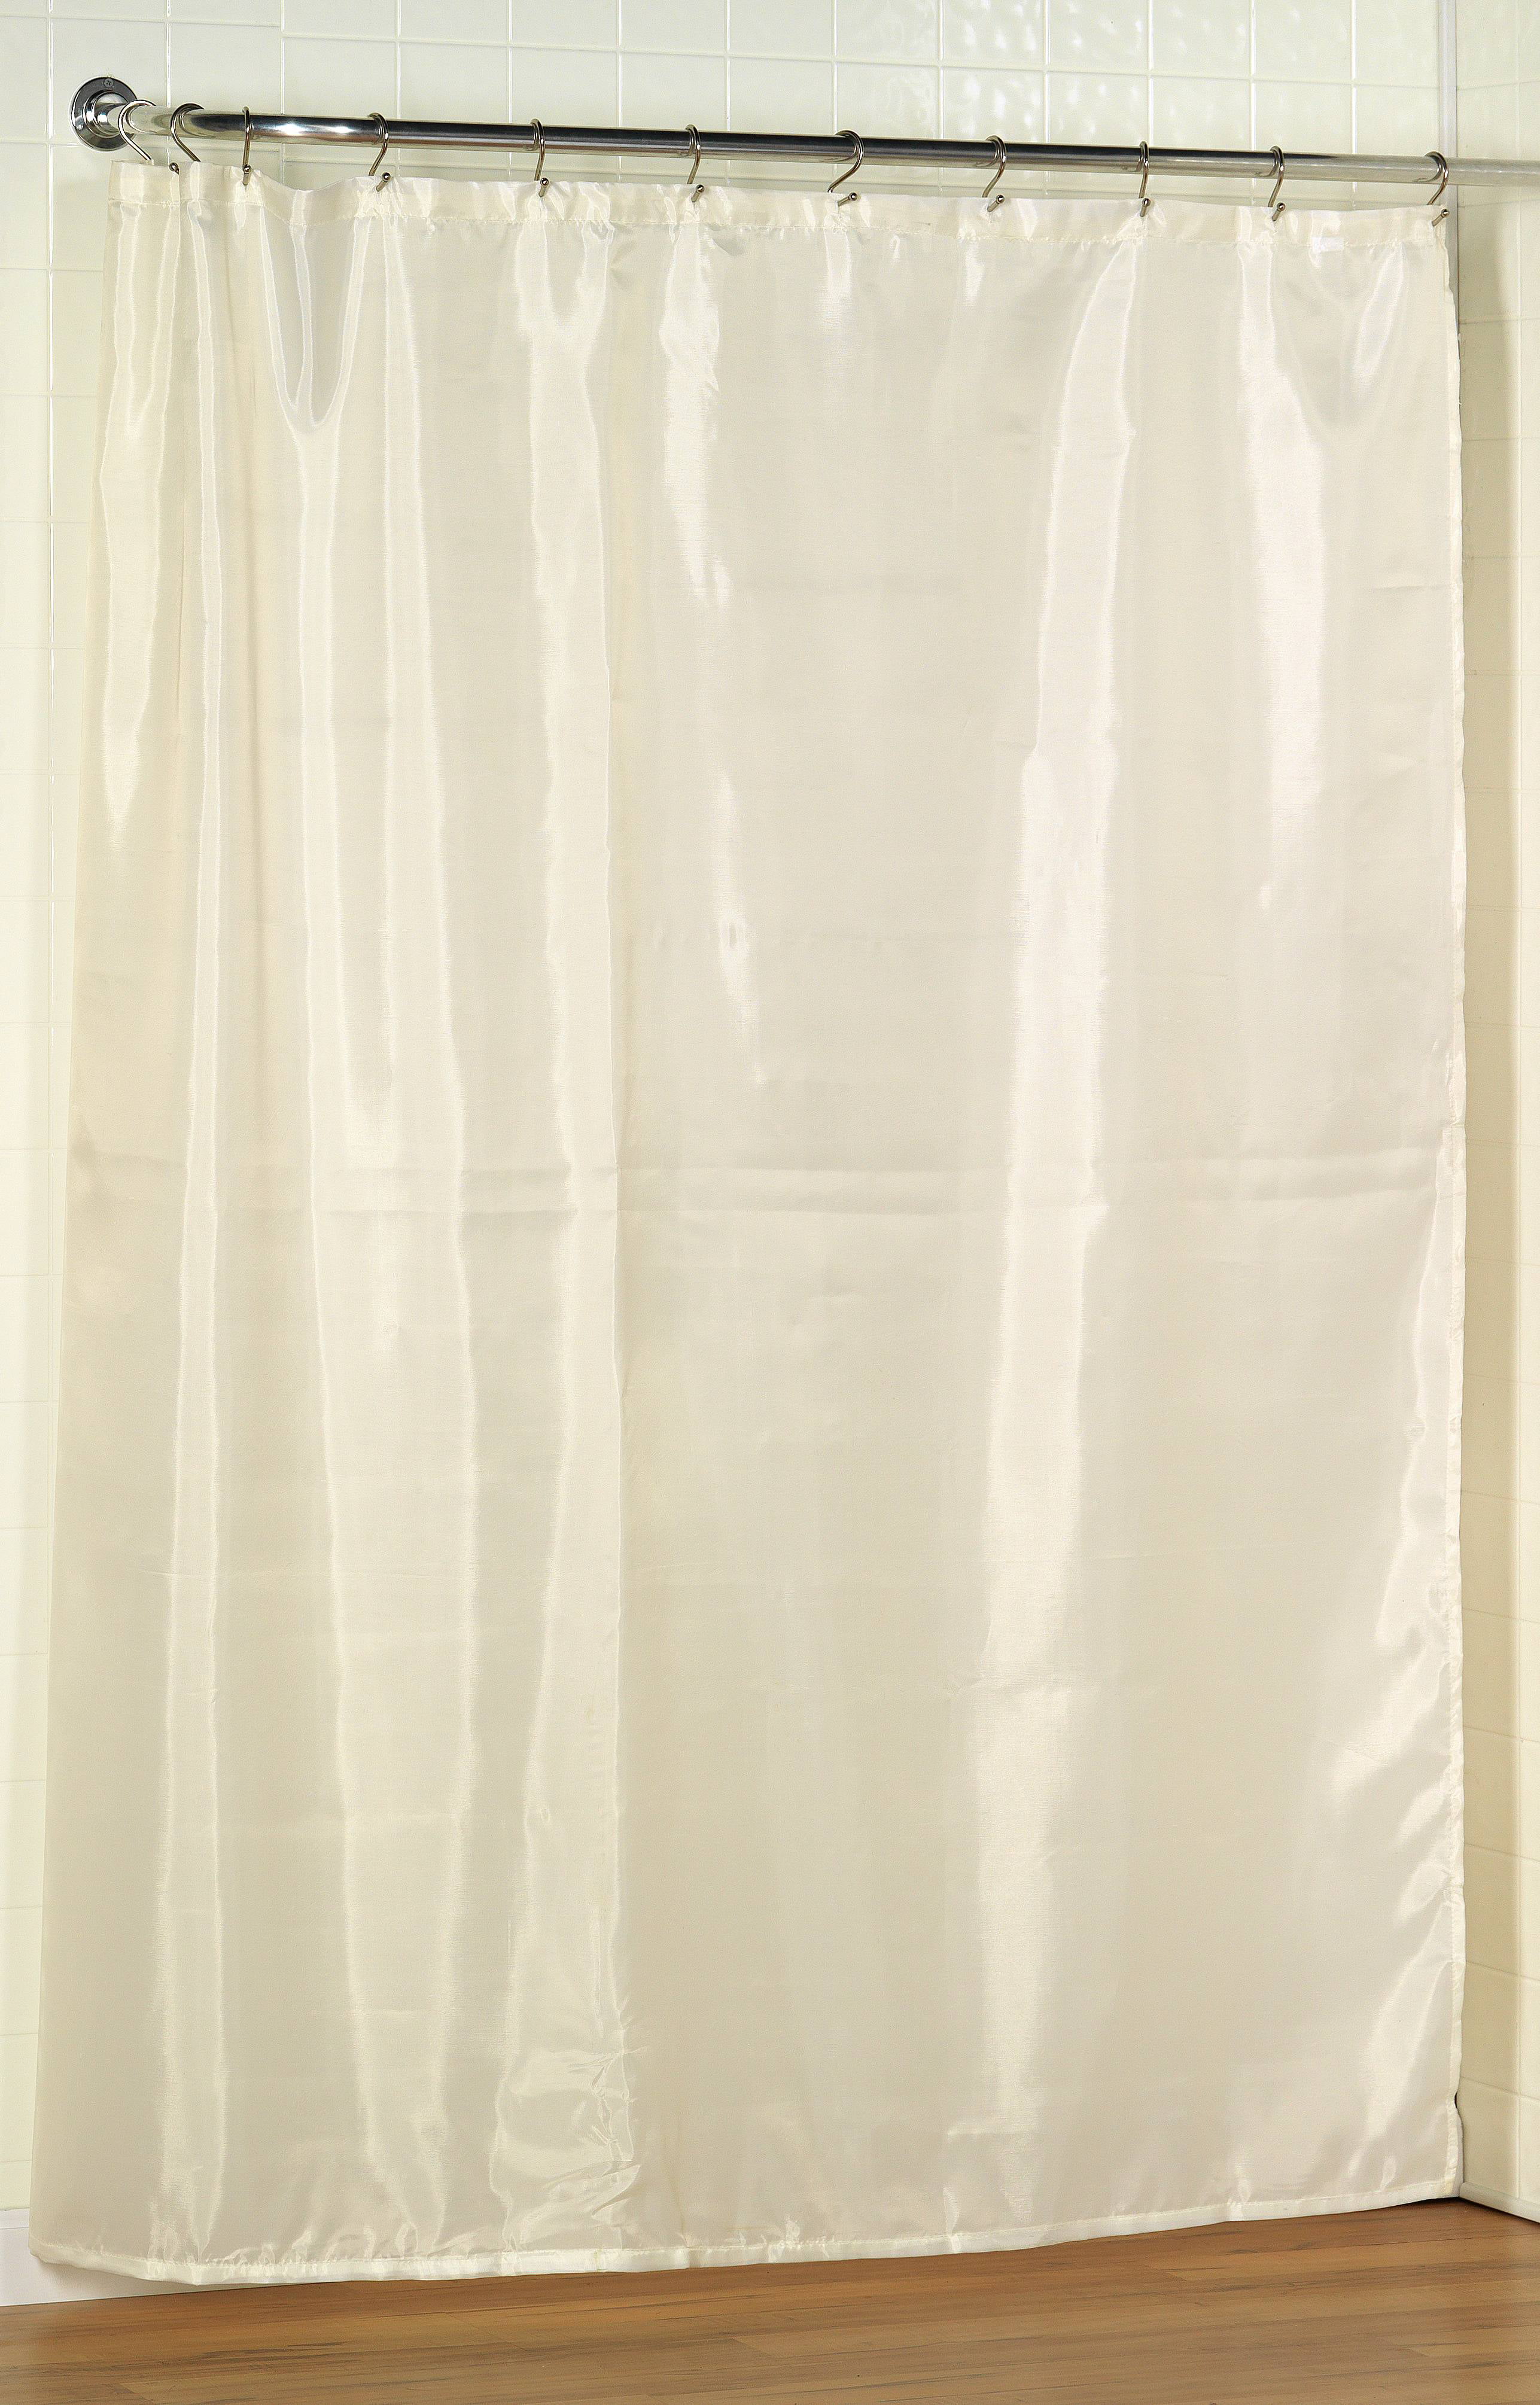 Carnation Home Standard-Sized Polyester Fabric Shower Curtain Liner in White 